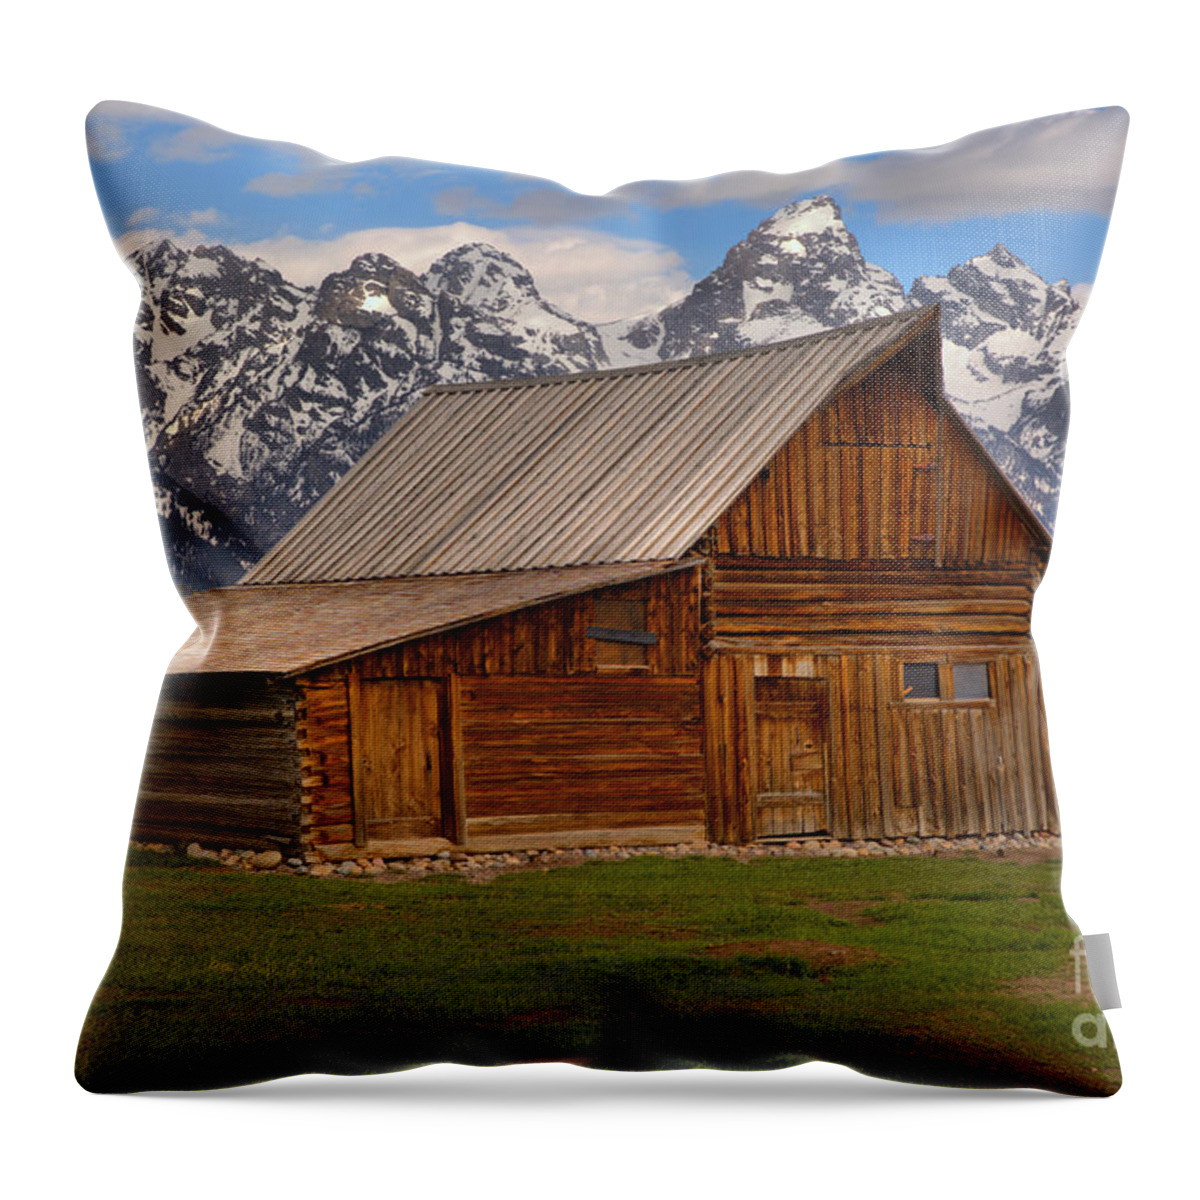 Moulton Barn Throw Pillow featuring the photograph Historic Moulton Barn by Adam Jewell